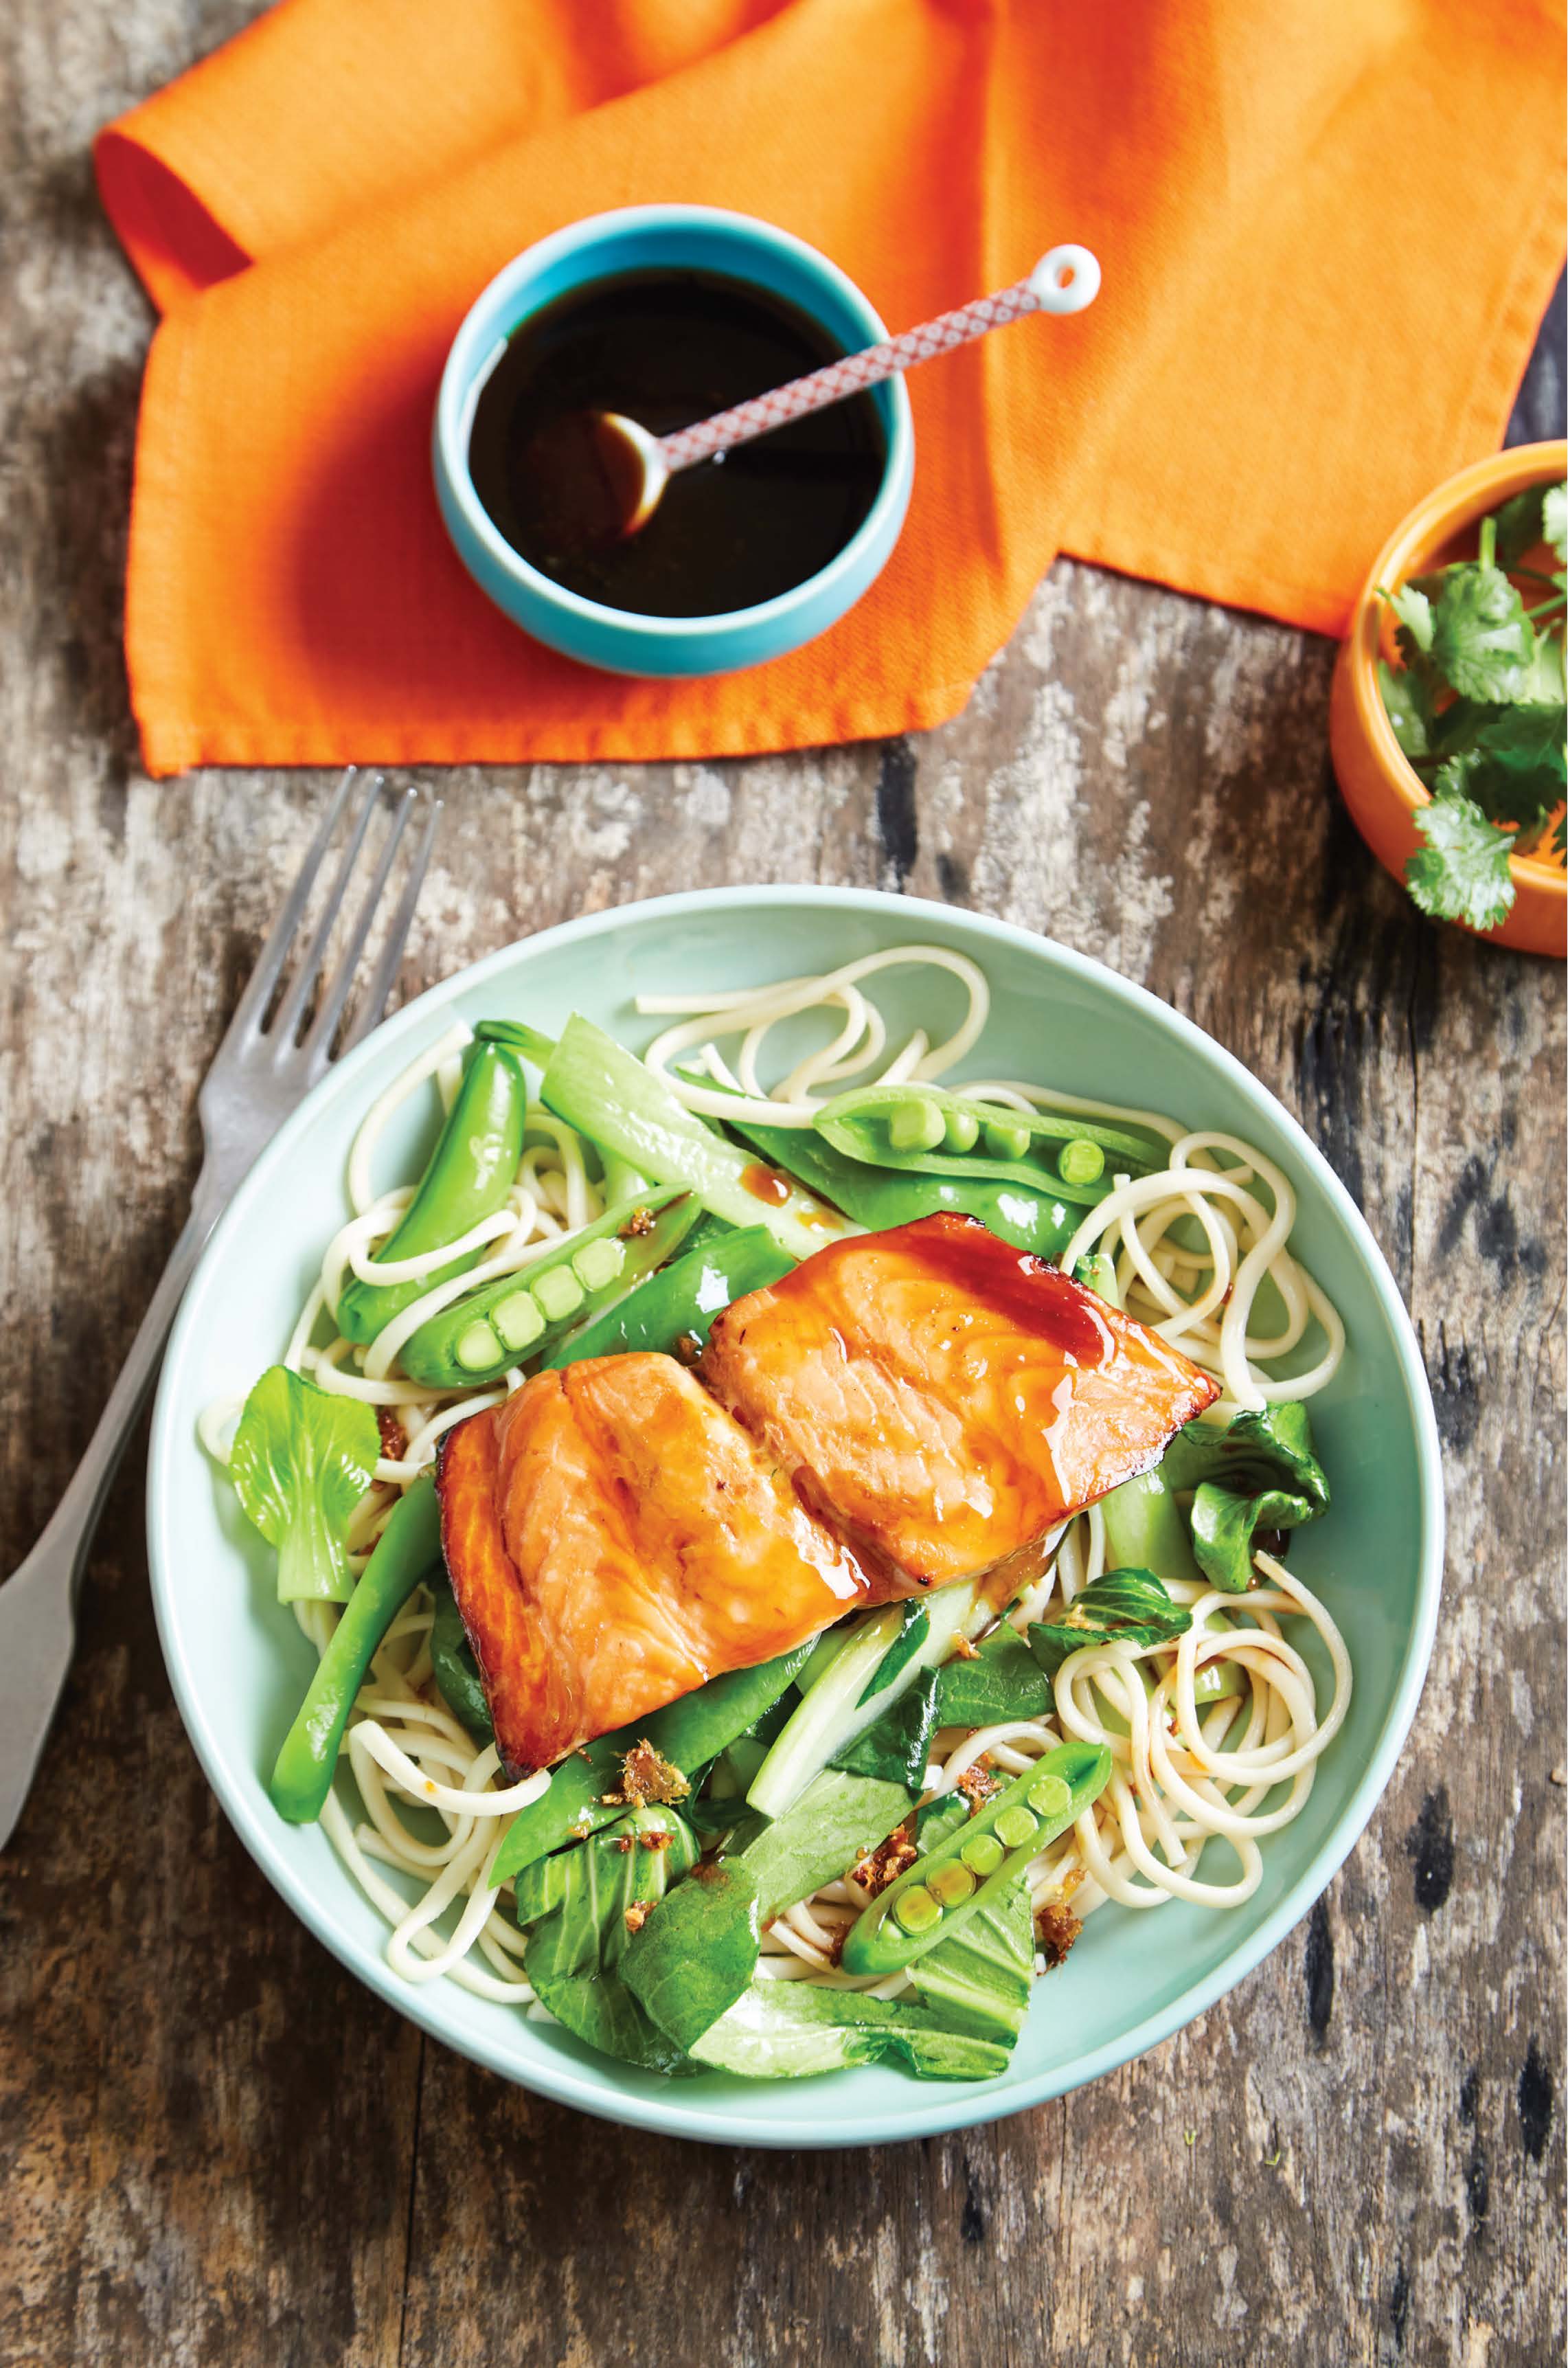 Teriyaki salmon with udon noodles and stir‑fried vegetables